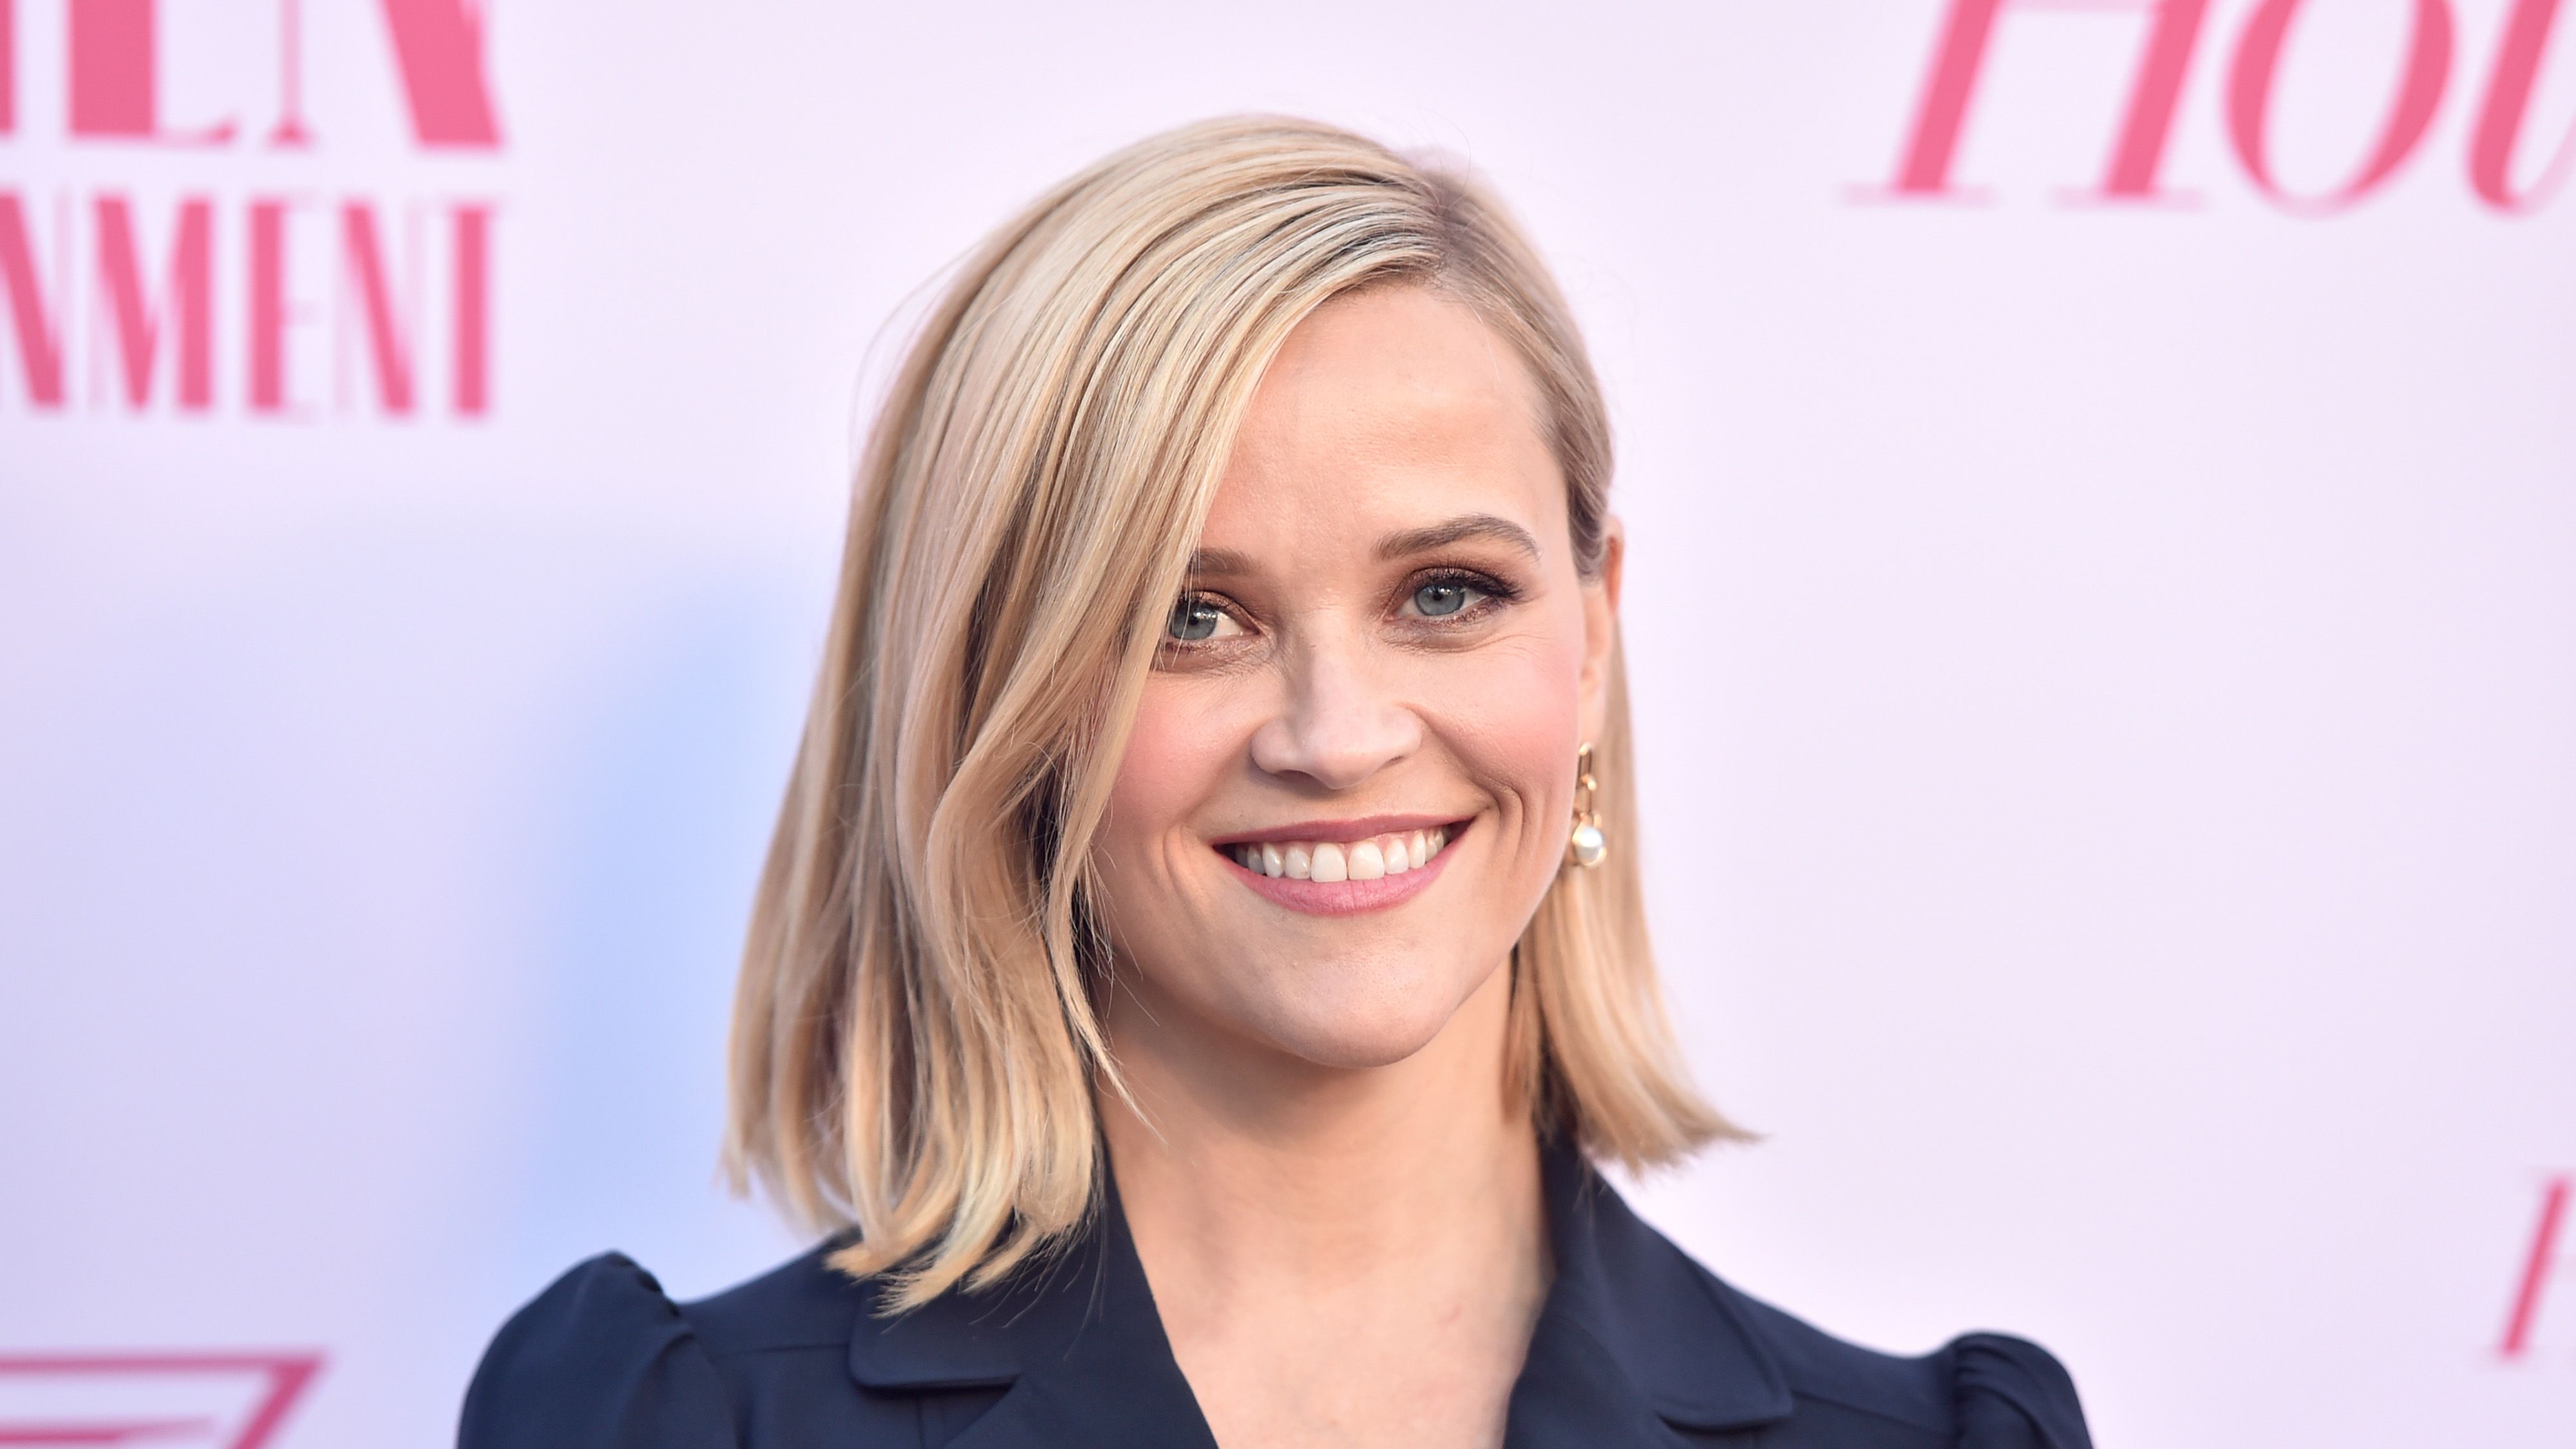 Reese Witherspoon Having Sex - Reese Witherspoon Has Epic Abs In A Workout Bra In An IG Yoga Vid